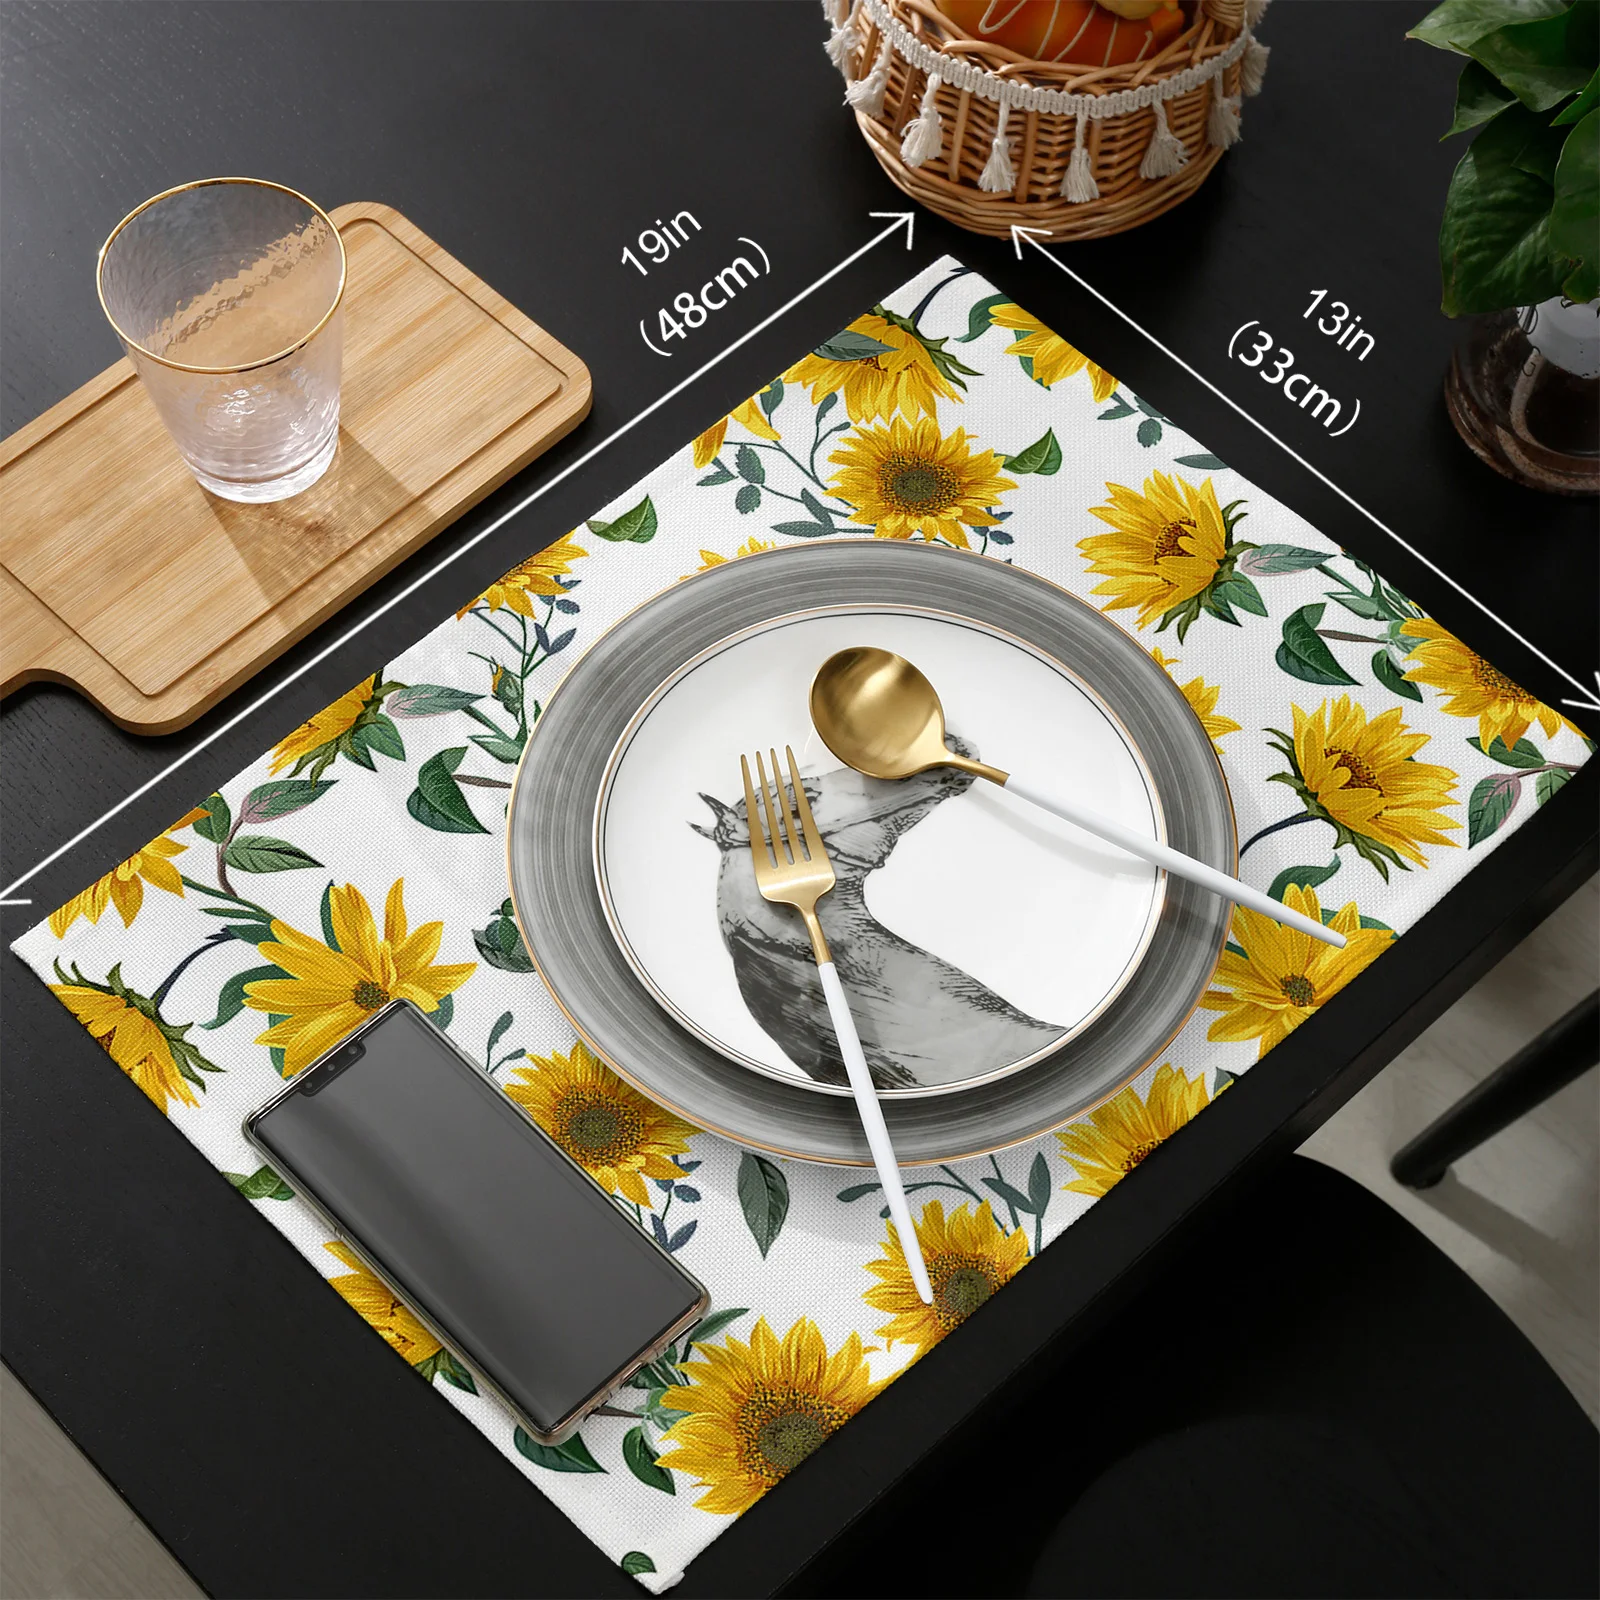 

Sunflower Texture Retro Table Runner Set Wedding Table Decoration Home Kitchen Dining Table Decor Placemats